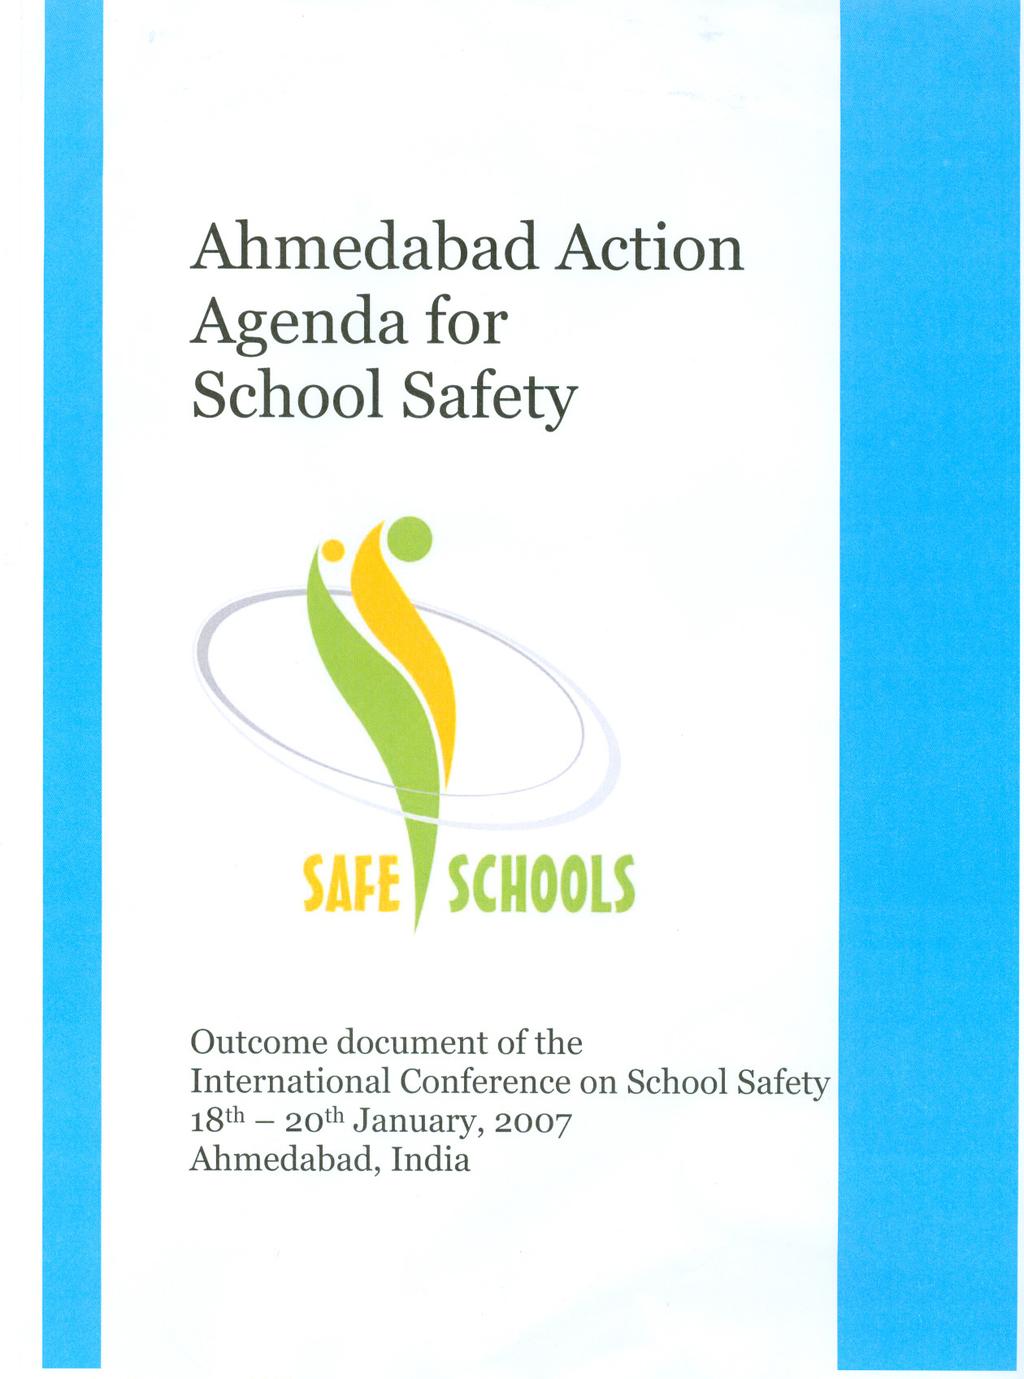 Ahmedabad Action Agenda for School Safety SA~E, SCHOOLS Outcome document of the